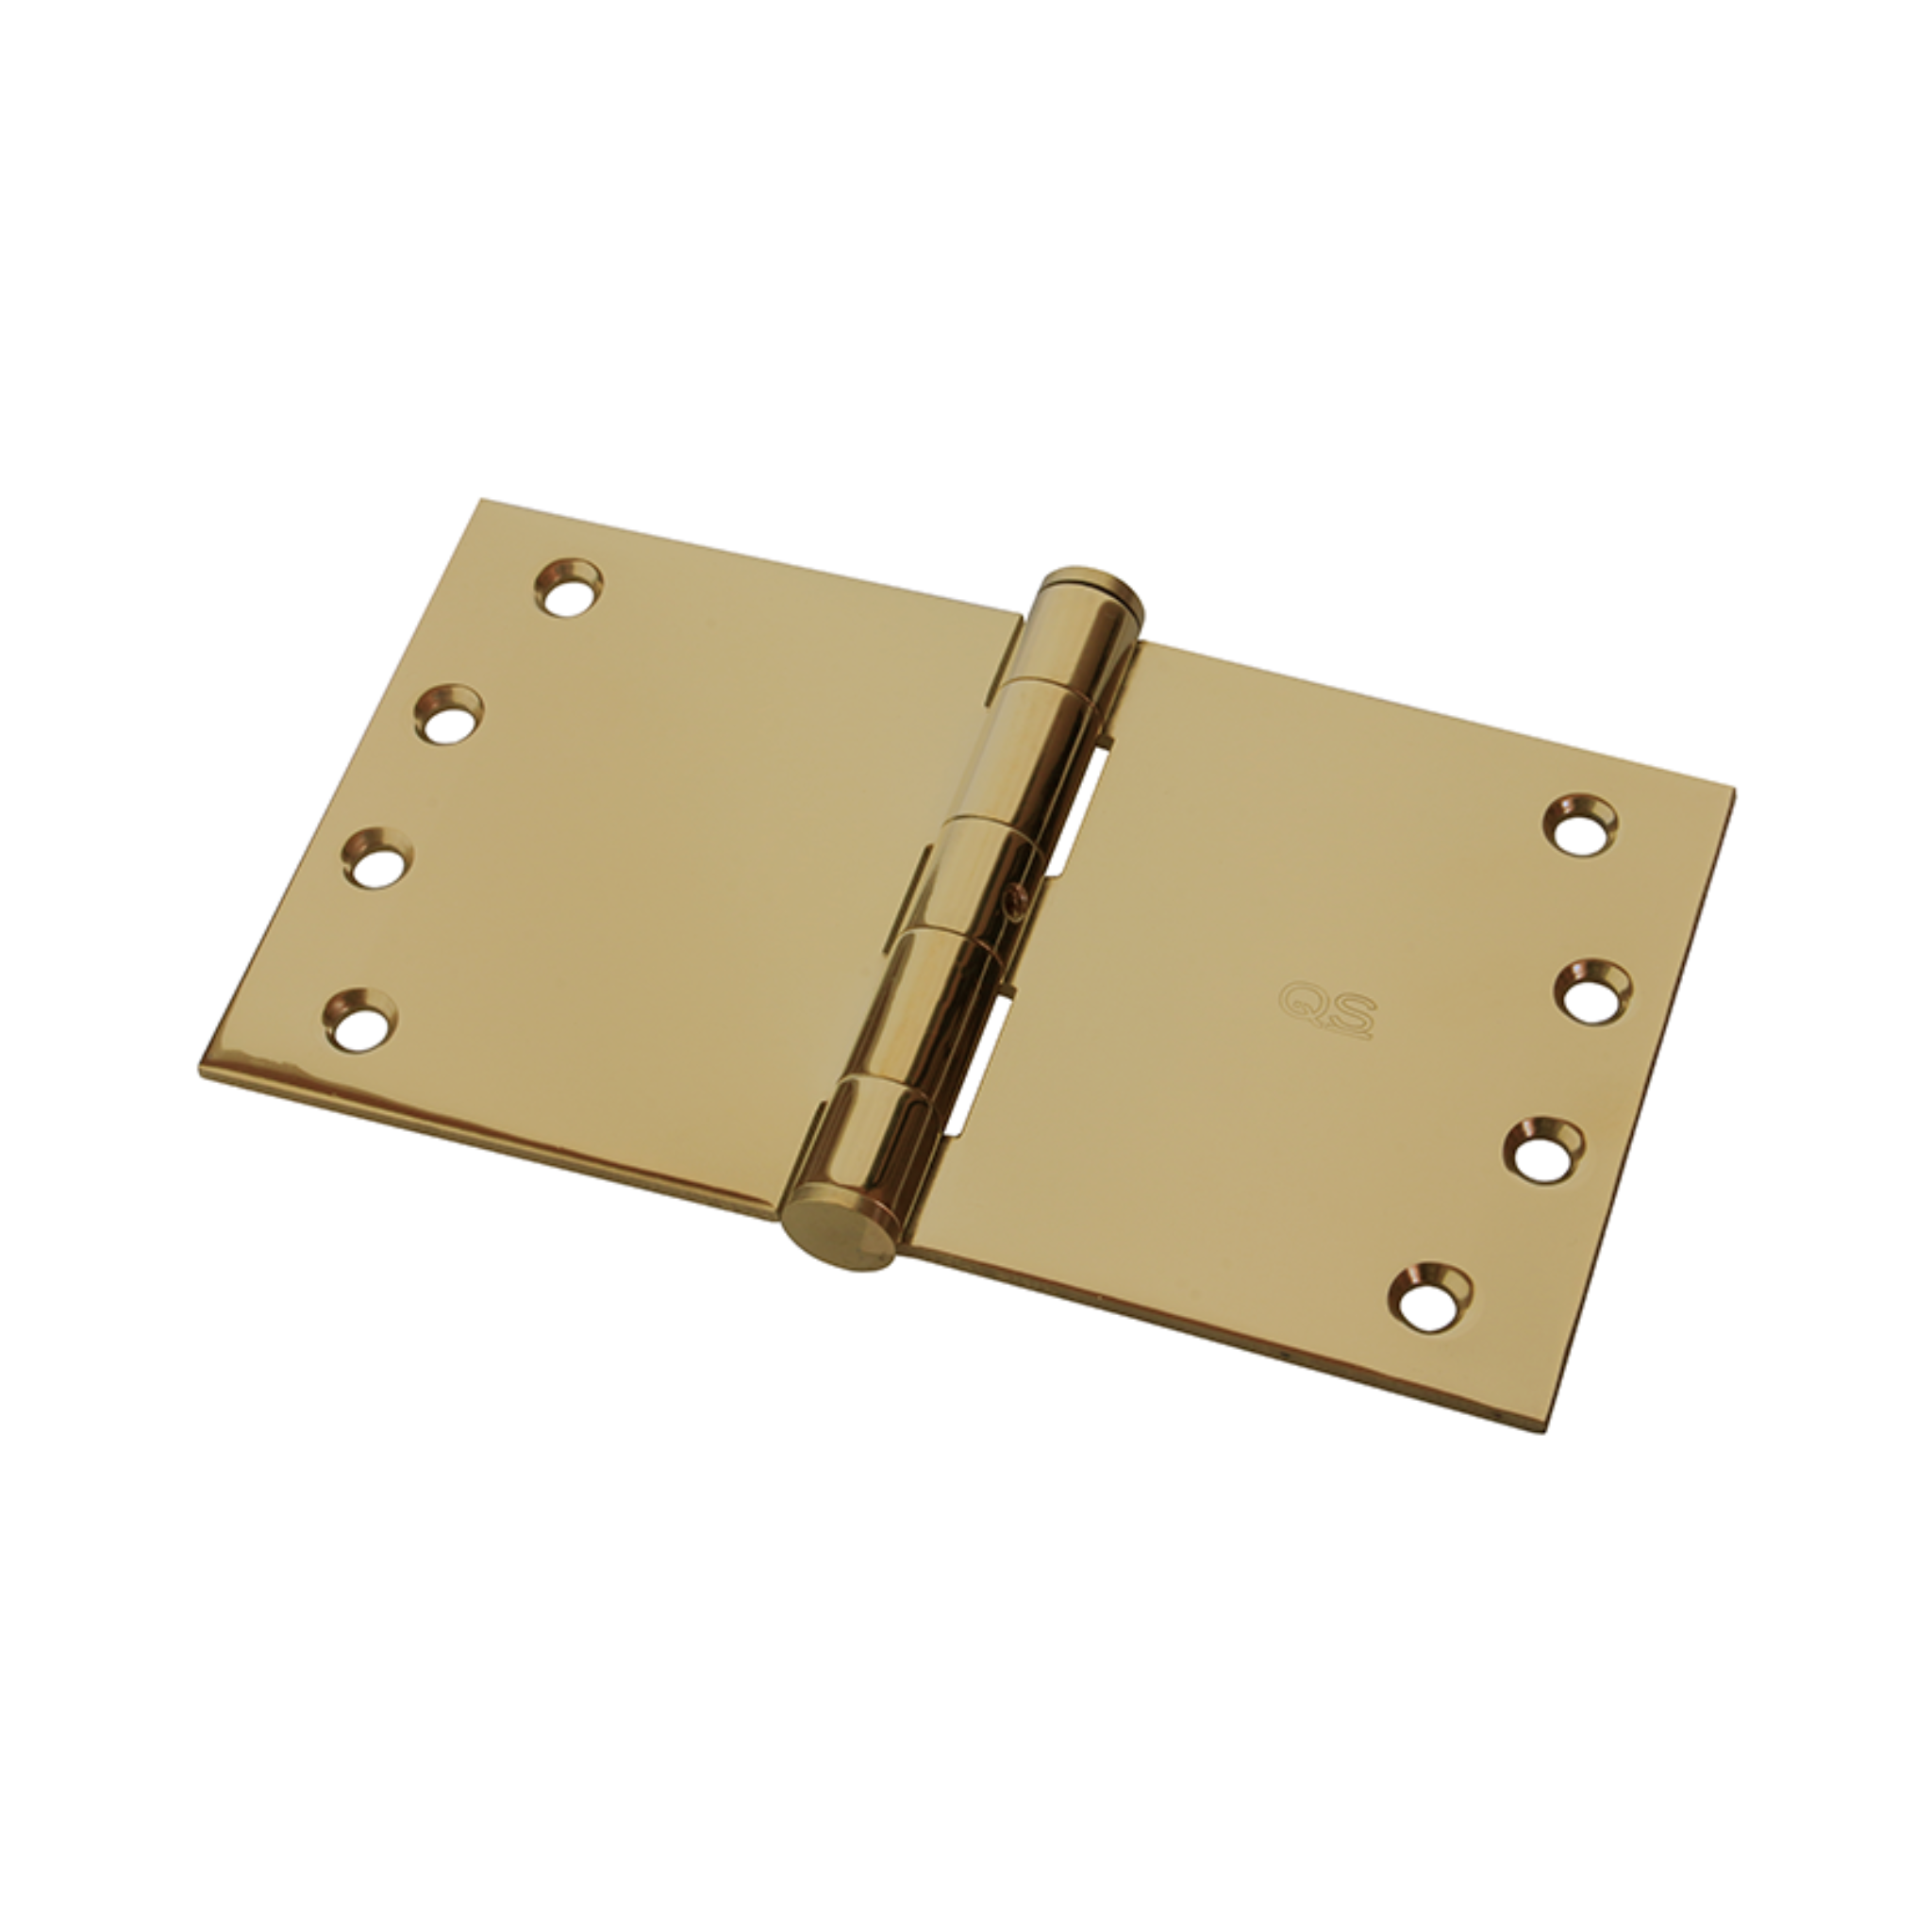 QS4412/2PVD, Projection Hinge, 2 x Hinges (1 Pair), 100mm (h) x 180mm (w) x 3.5mm (t), PVD Brass, QS